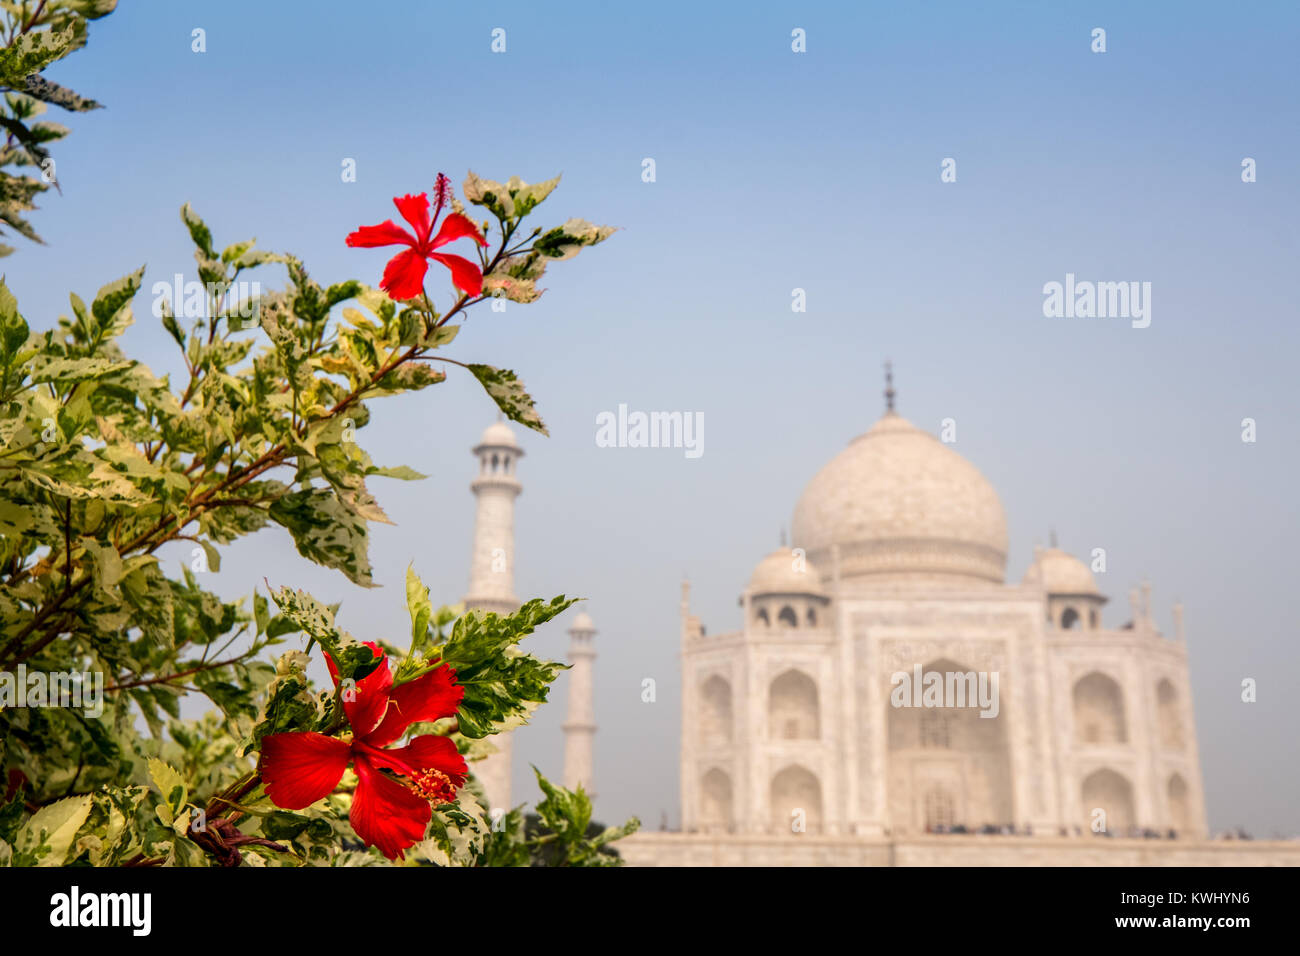 The Taj Mahal, Agra, India. Built by the Mughal emperor Shah Jahan, the mausoleum houses his wife's tomb Stock Photo